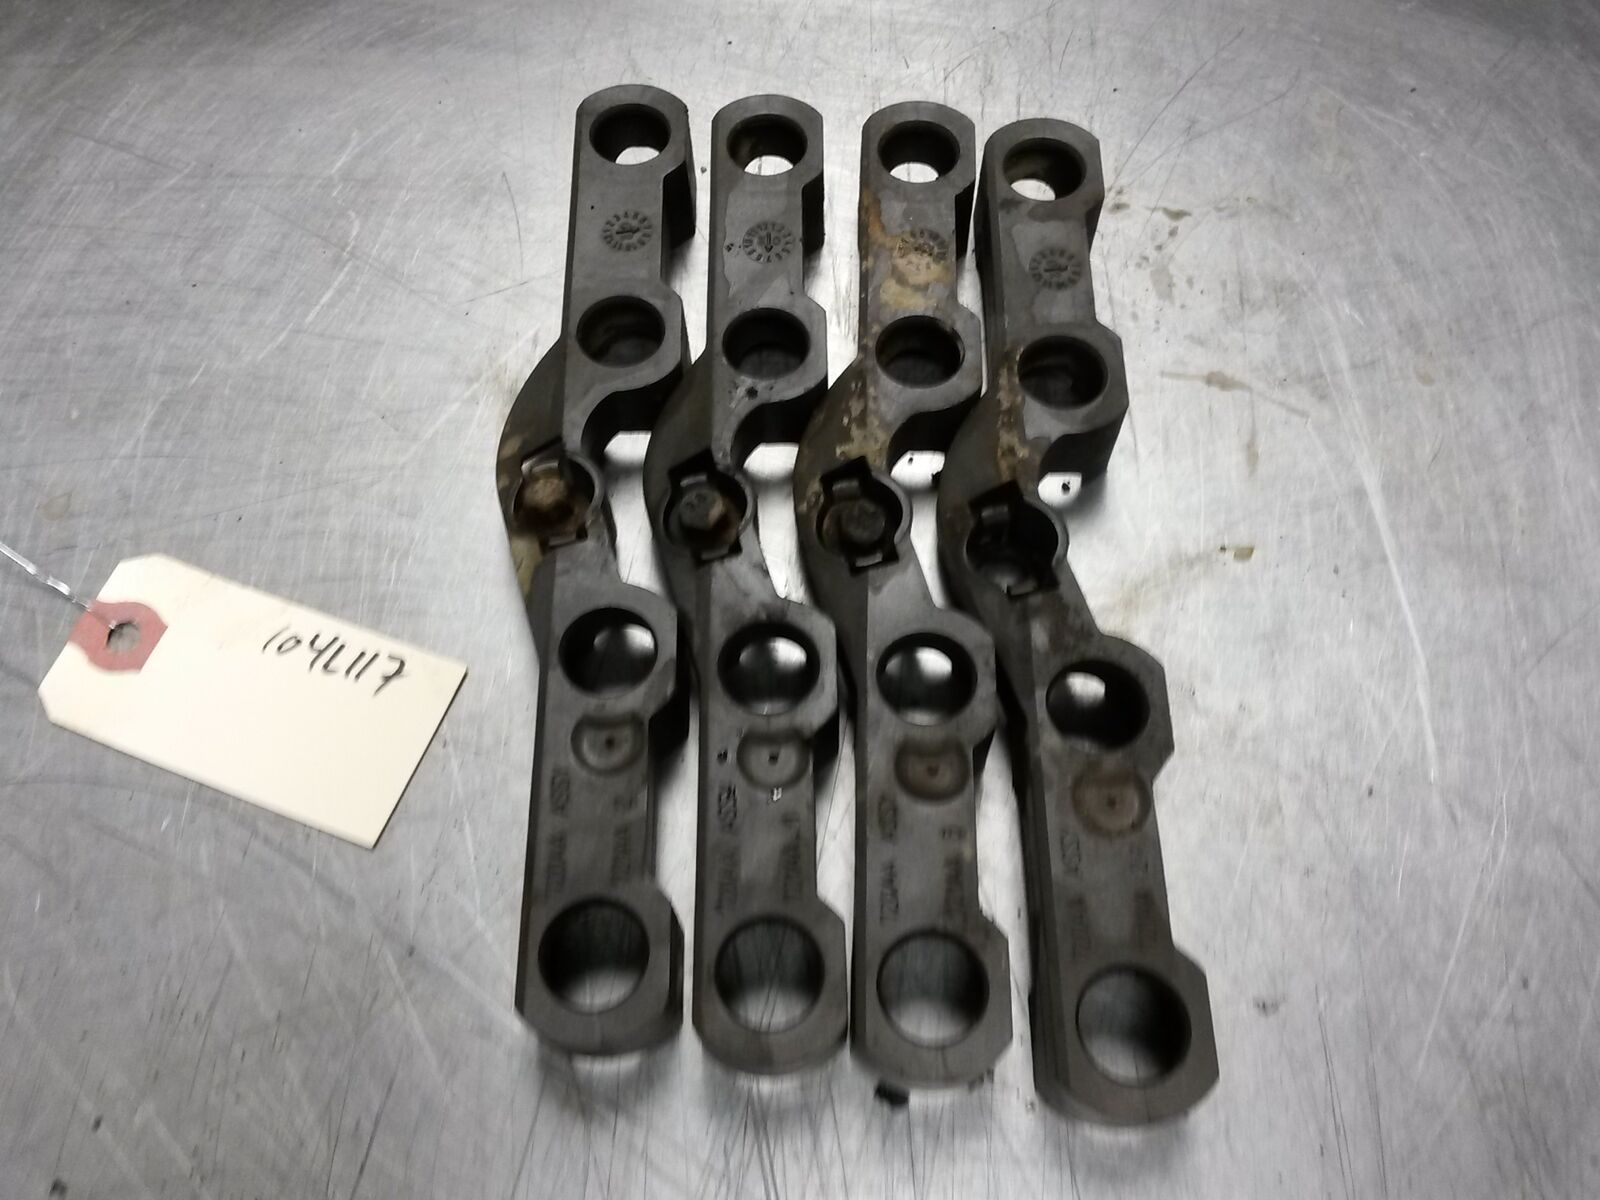 104L117 Lifter Retainers 2003 Dodge Ram 1500 and similar items